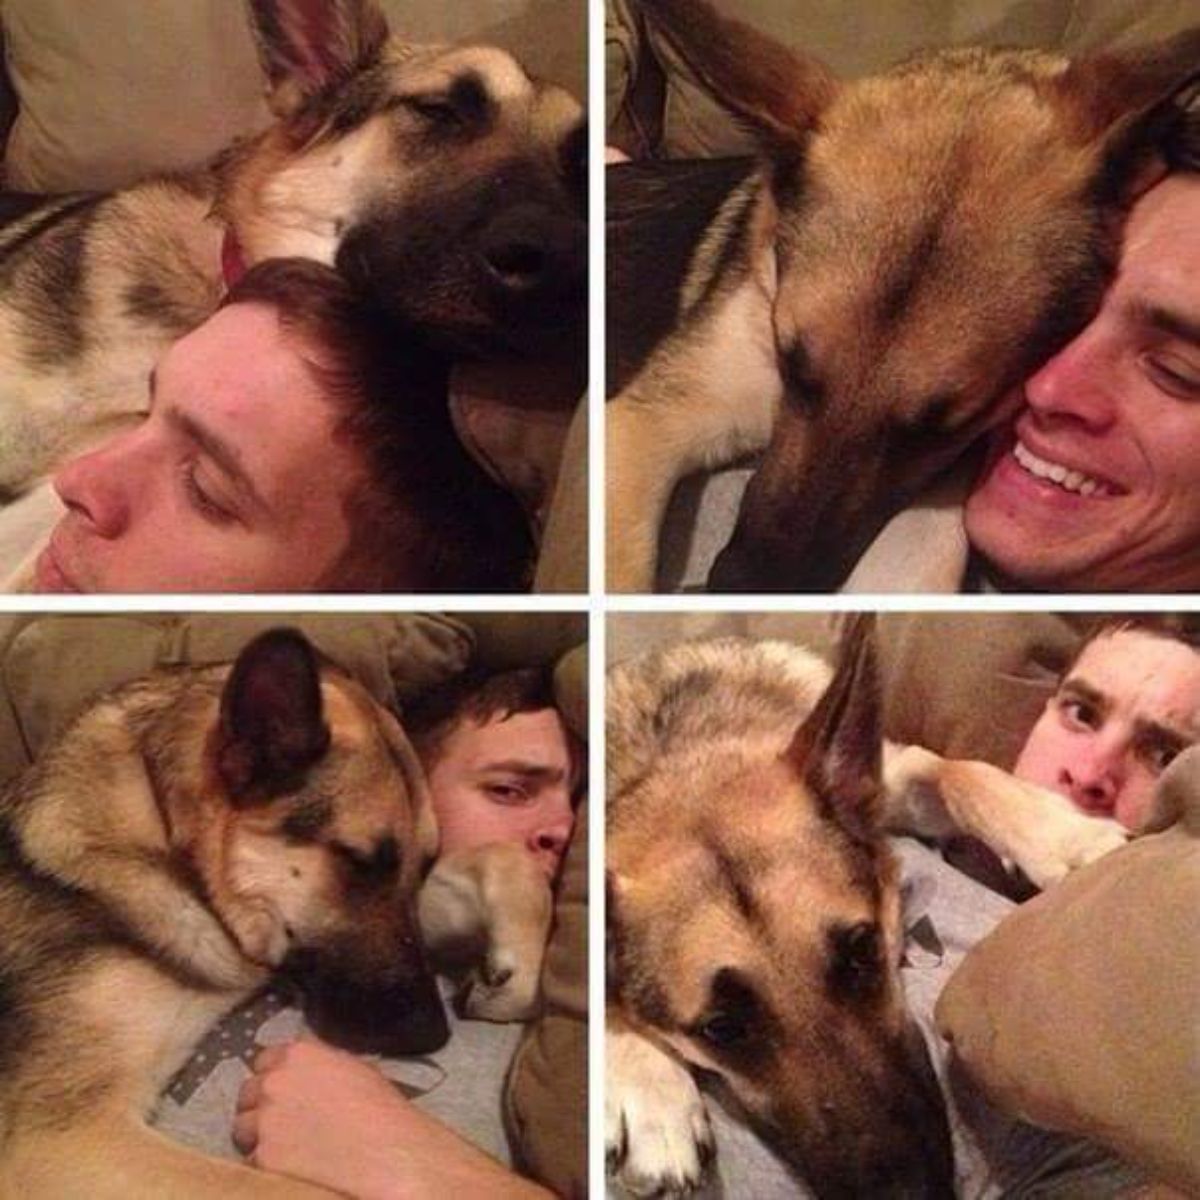 4 photos of a german shepherd laying on and very close to a man